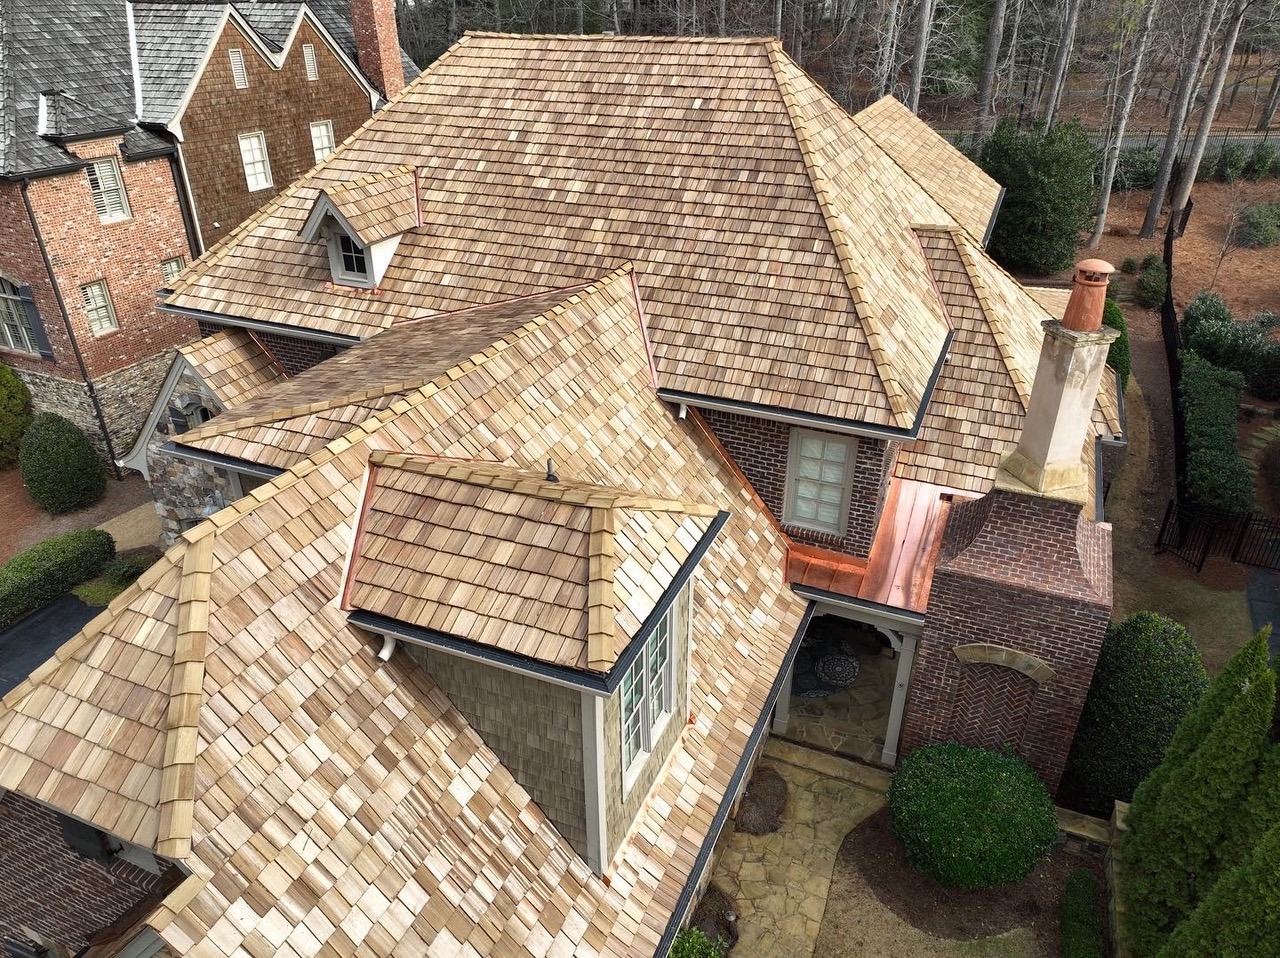 How often should you inspect your roof